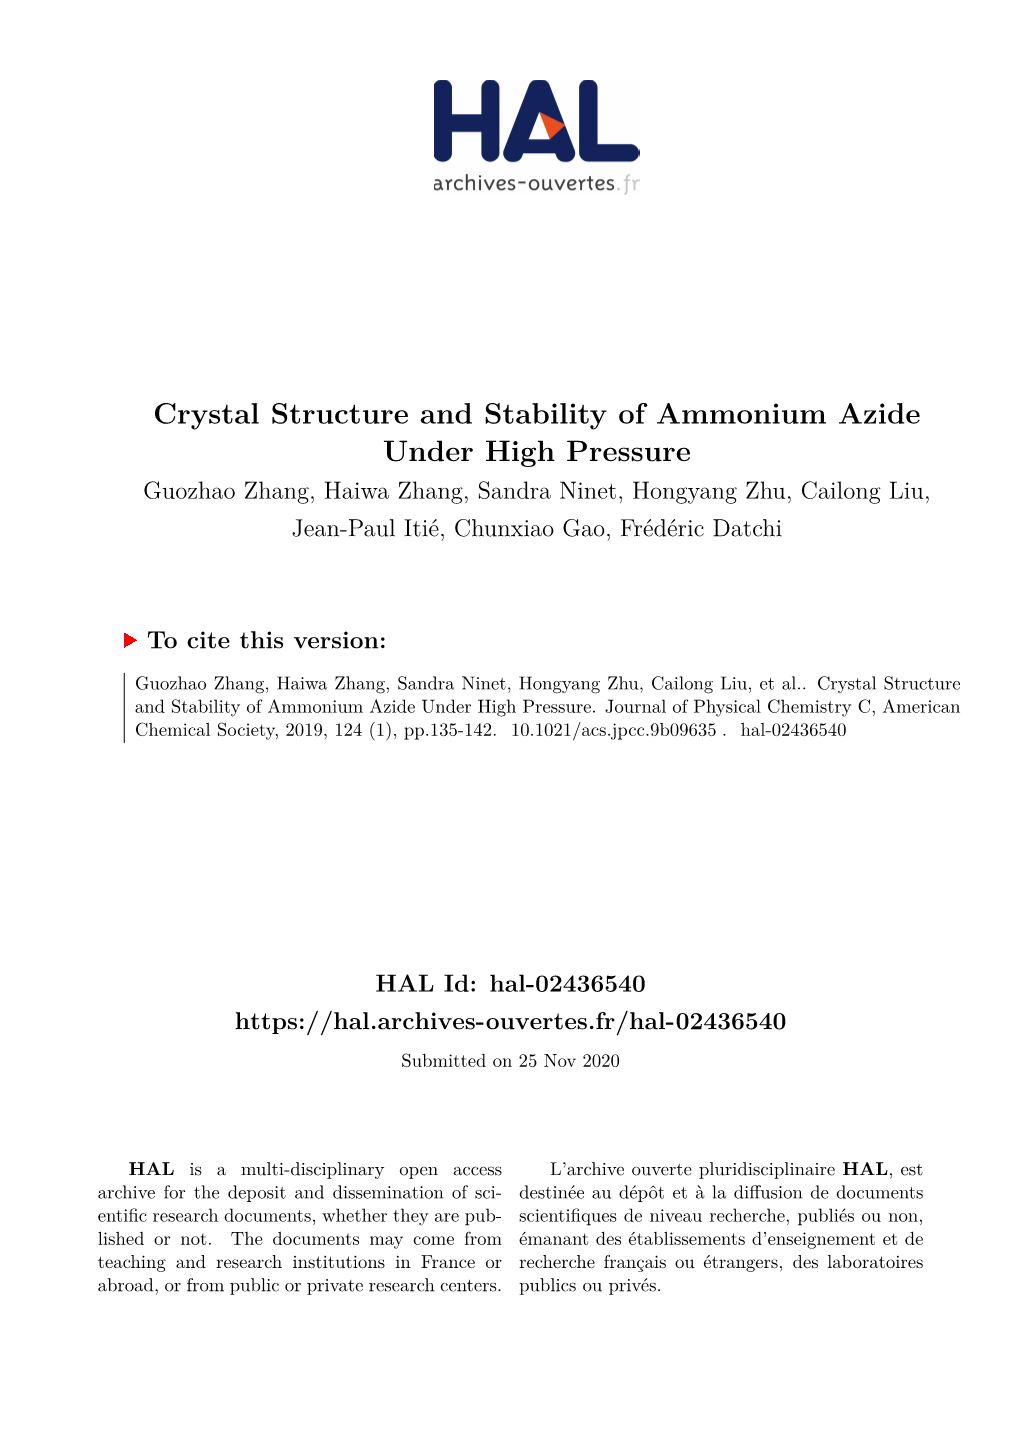 Crystal Structure and Stability of Ammonium